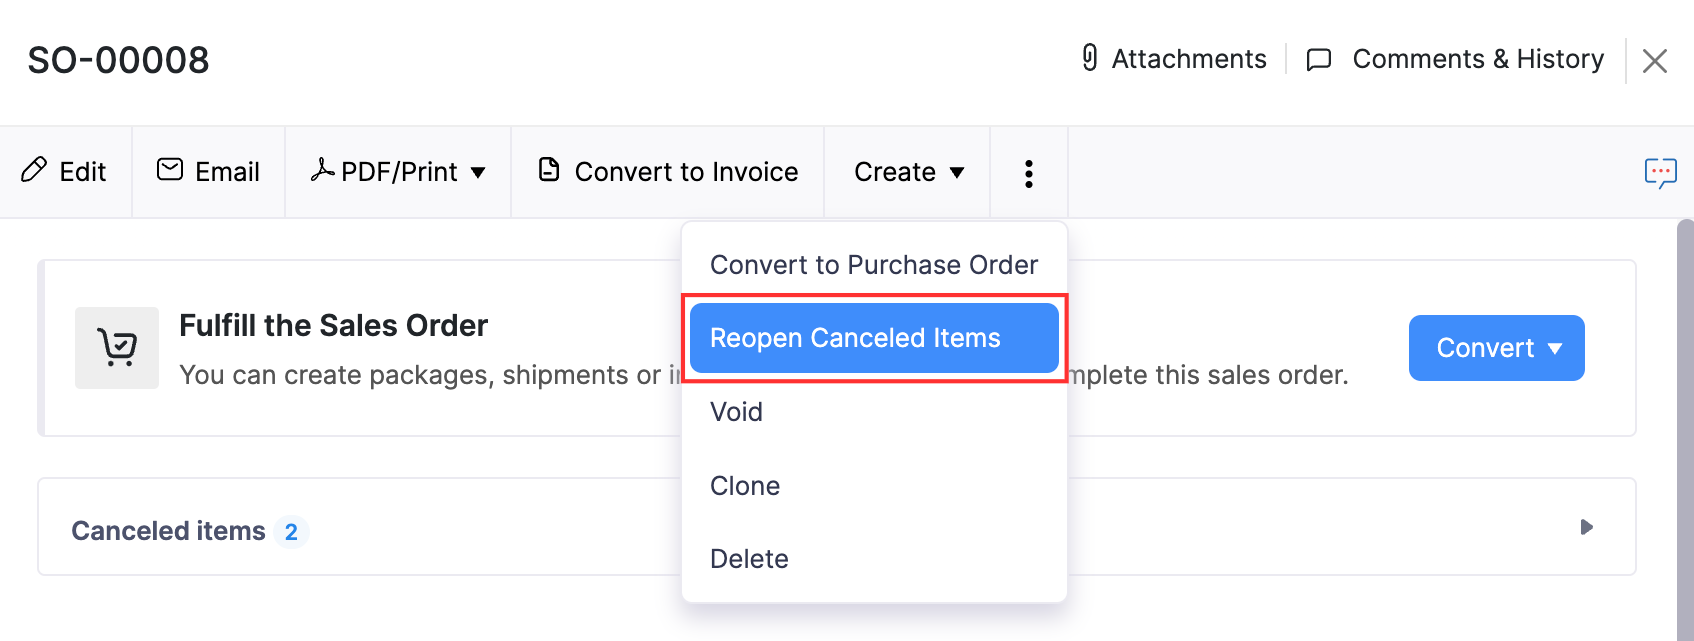 Click Reopen Canceled Items